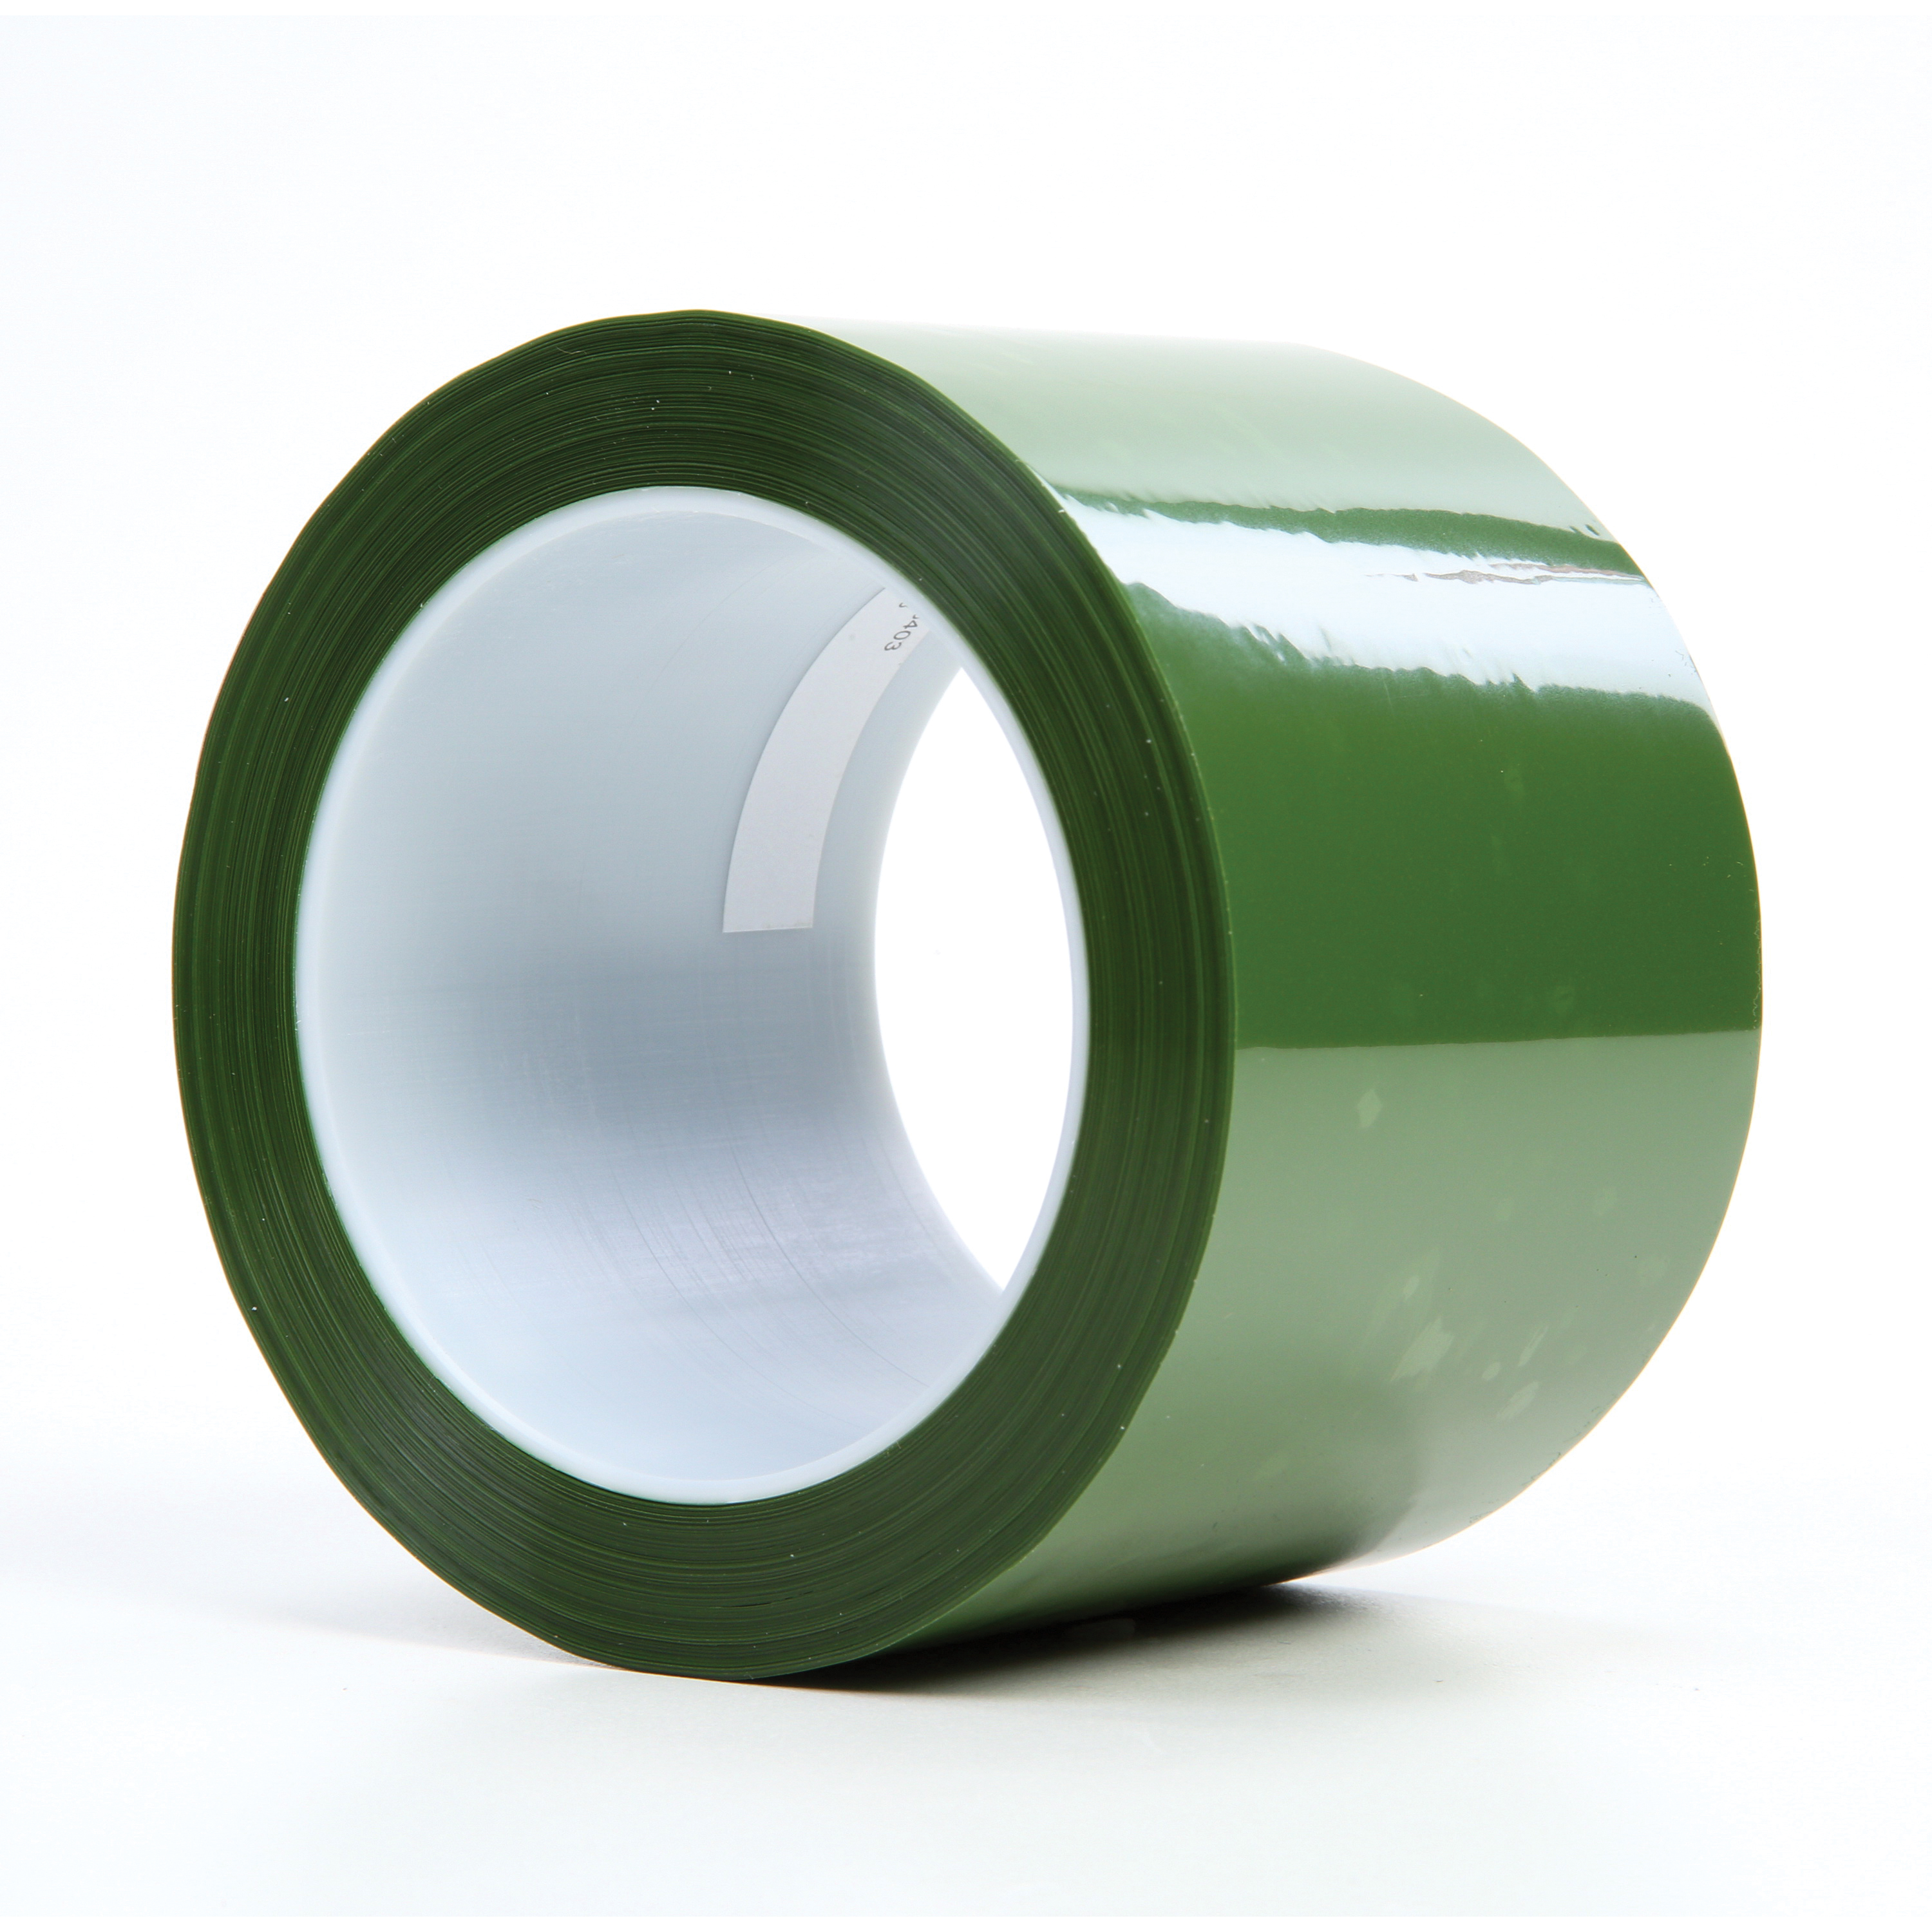 3M™ 021200-61461 Tear-Resistant Masking Tape, 72 yd L x 3 in W, 2.4 mil THK, Silicon Adhesive, Polyester Backing